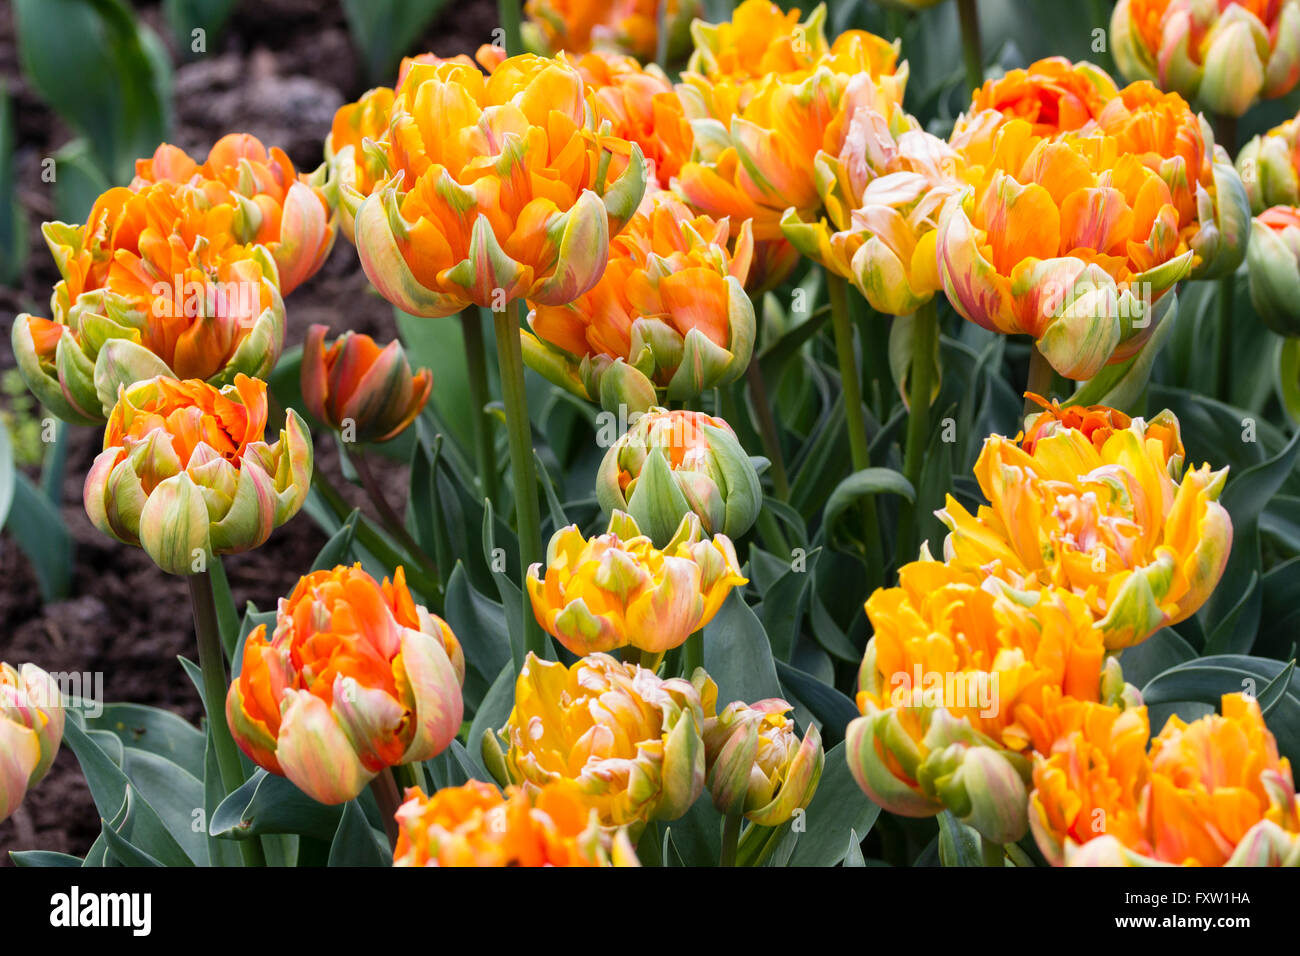 Rich green, orange and red flowers of the late double tulip, Tulipa 'Orange Princess' Stock Photo